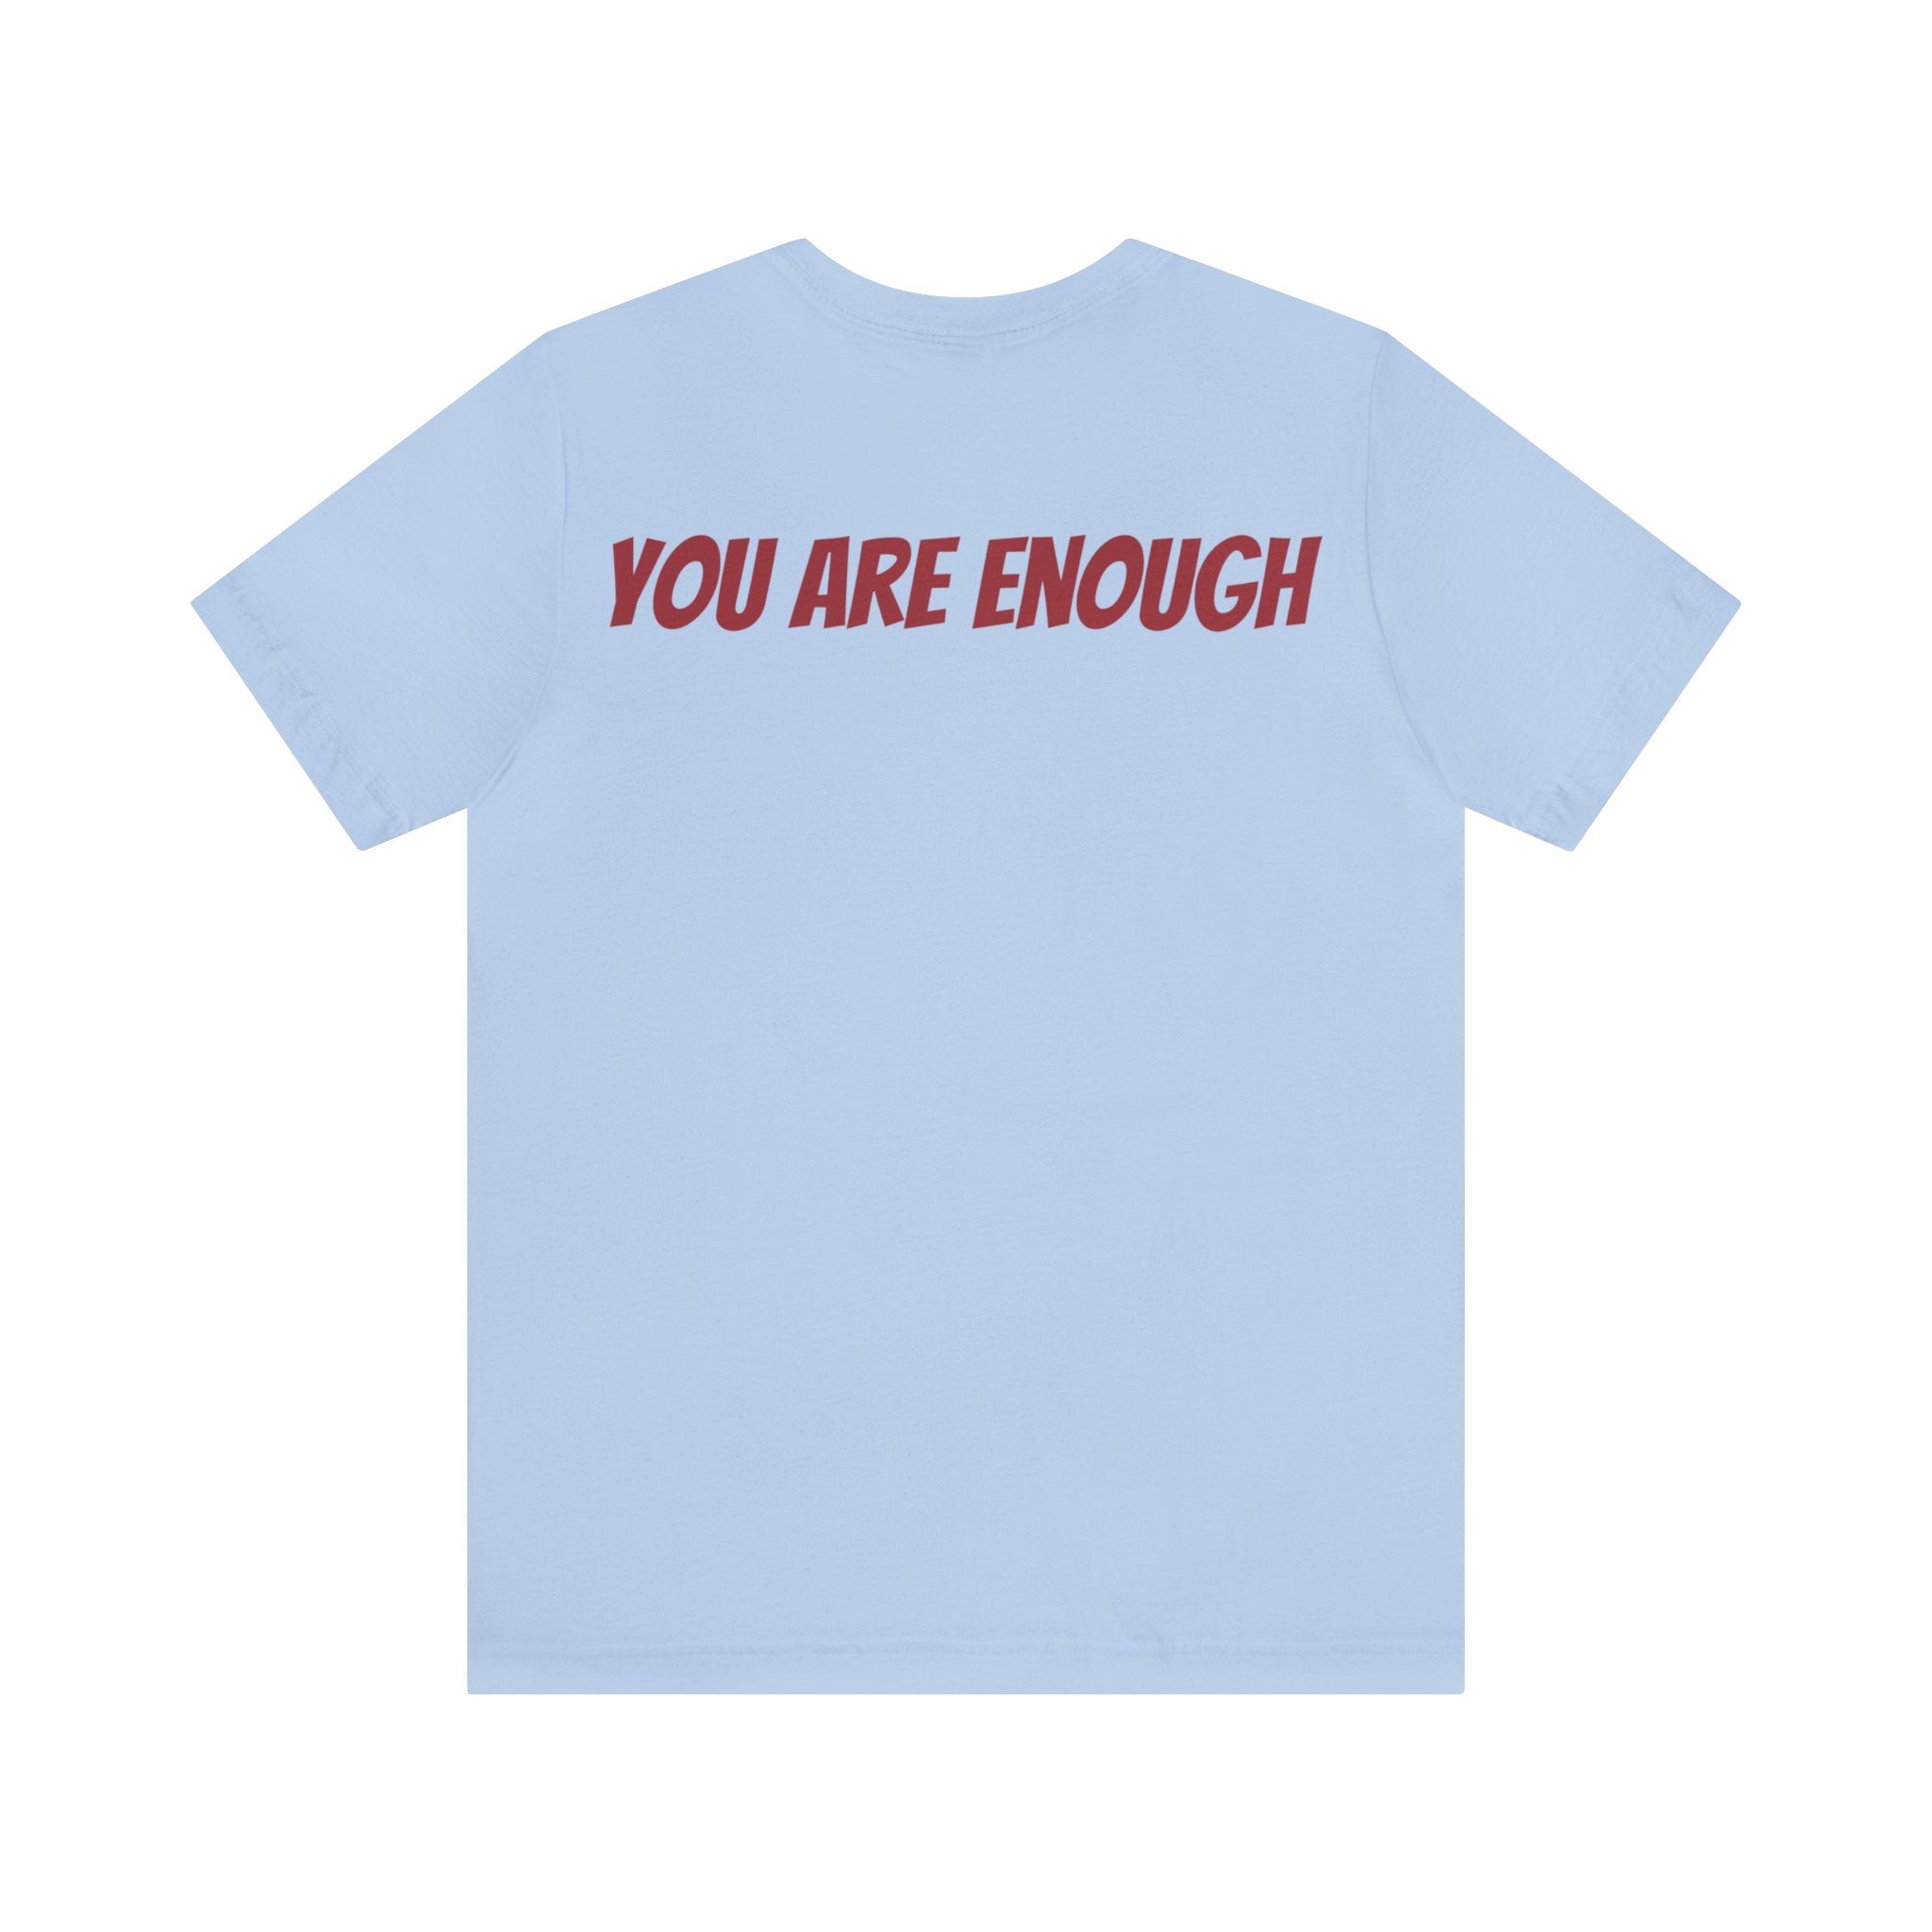 You Are Enough Short Sleeve Tee Bella+Canvas 3001 Heather Mauve Airlume Cotton Bella+Canvas 3001 Crew Neckline Jersey Short Sleeve Lightweight Fabric Mental Health Support Retail Fit Tear-away Label Tee Unisex Tee T-Shirt 2425587111042823093_2048 Printify